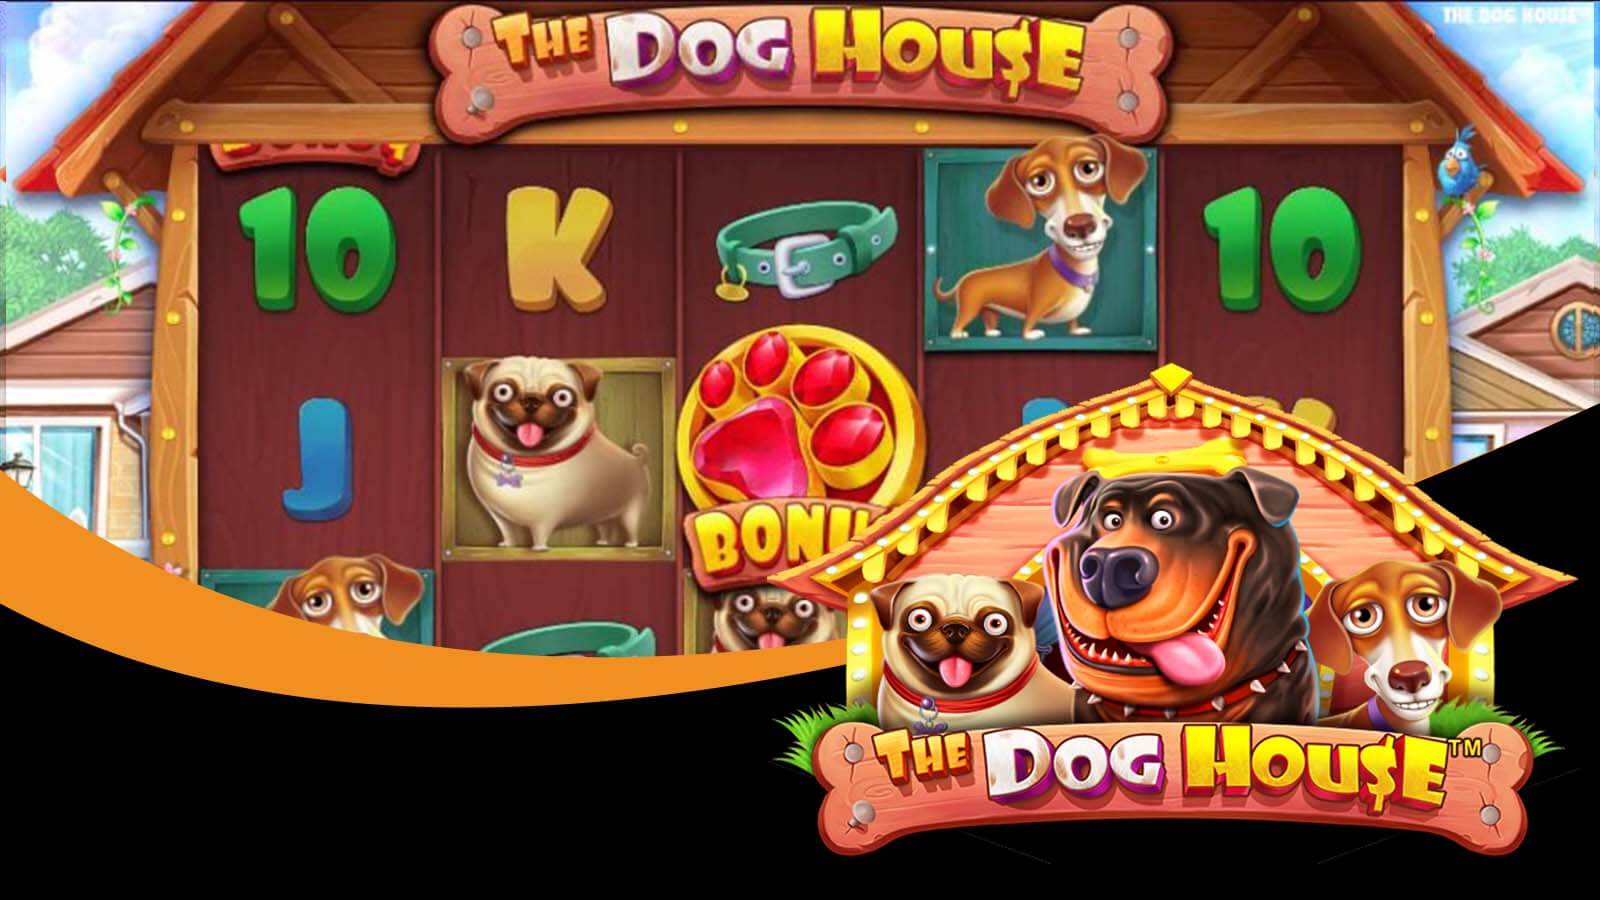 The Dog House - For the Pet Lovers